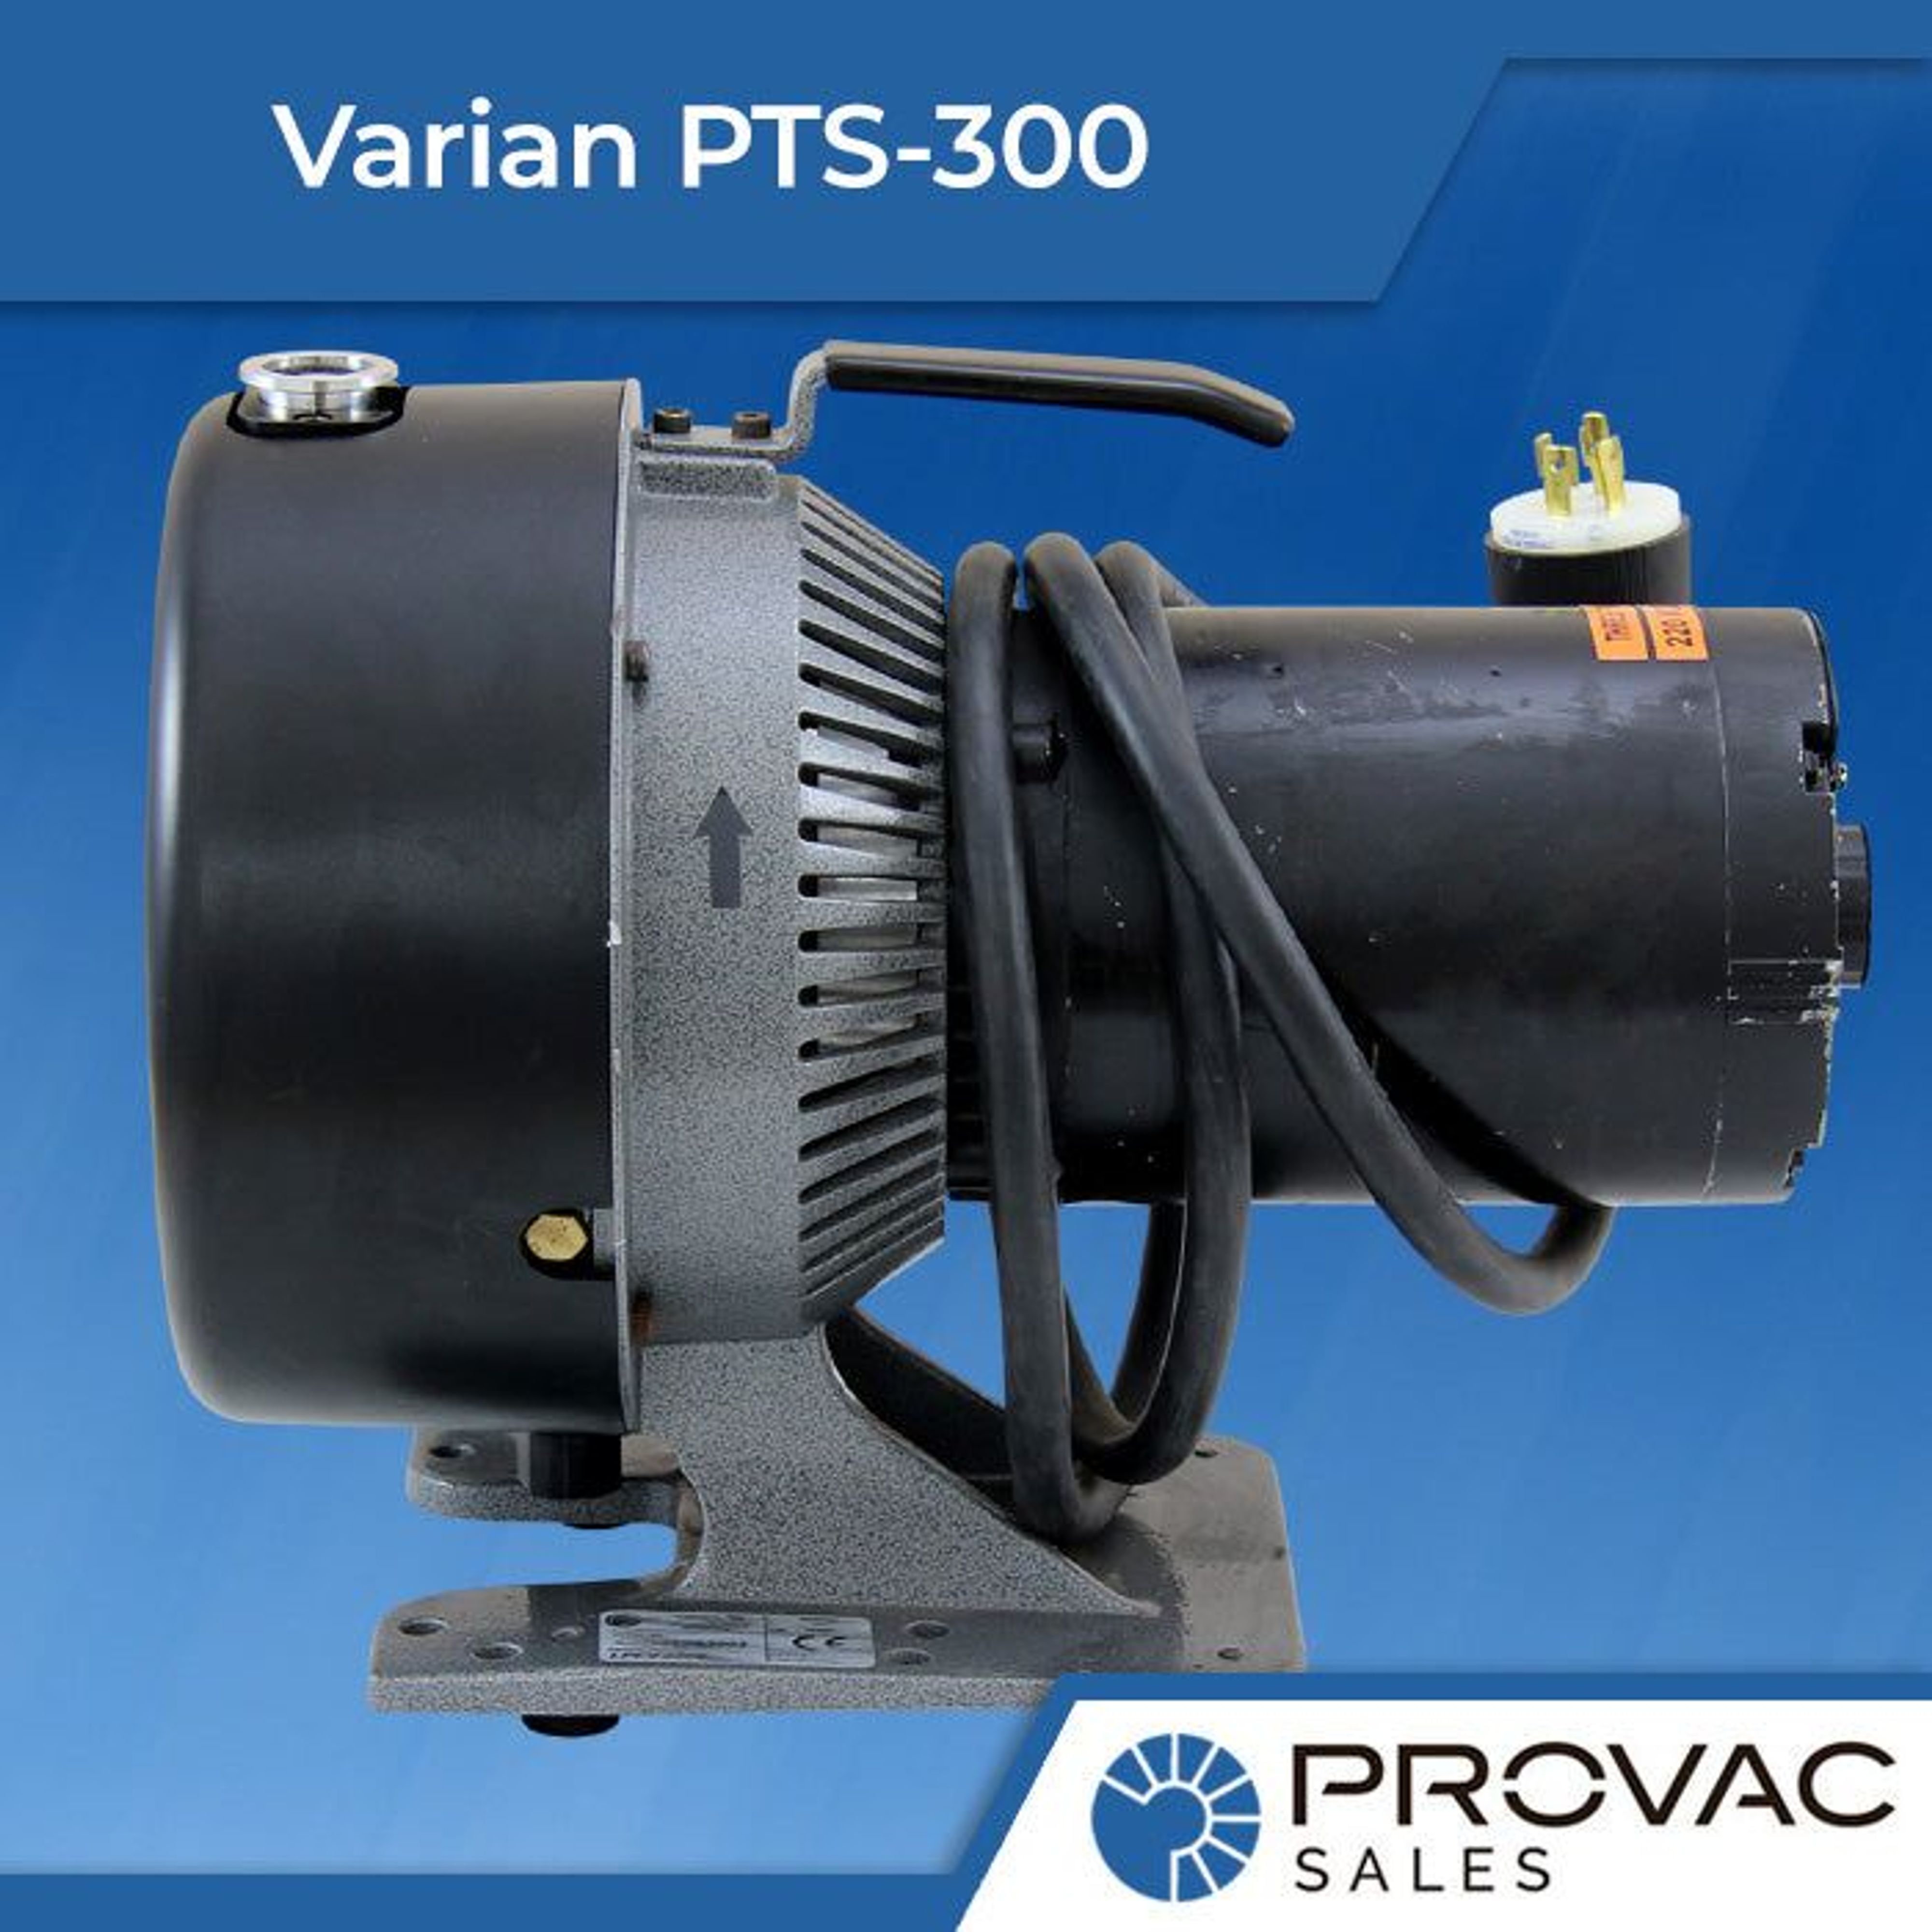 Varian PTS-300 Scroll Pump: In Stock, Ready To Ship Background